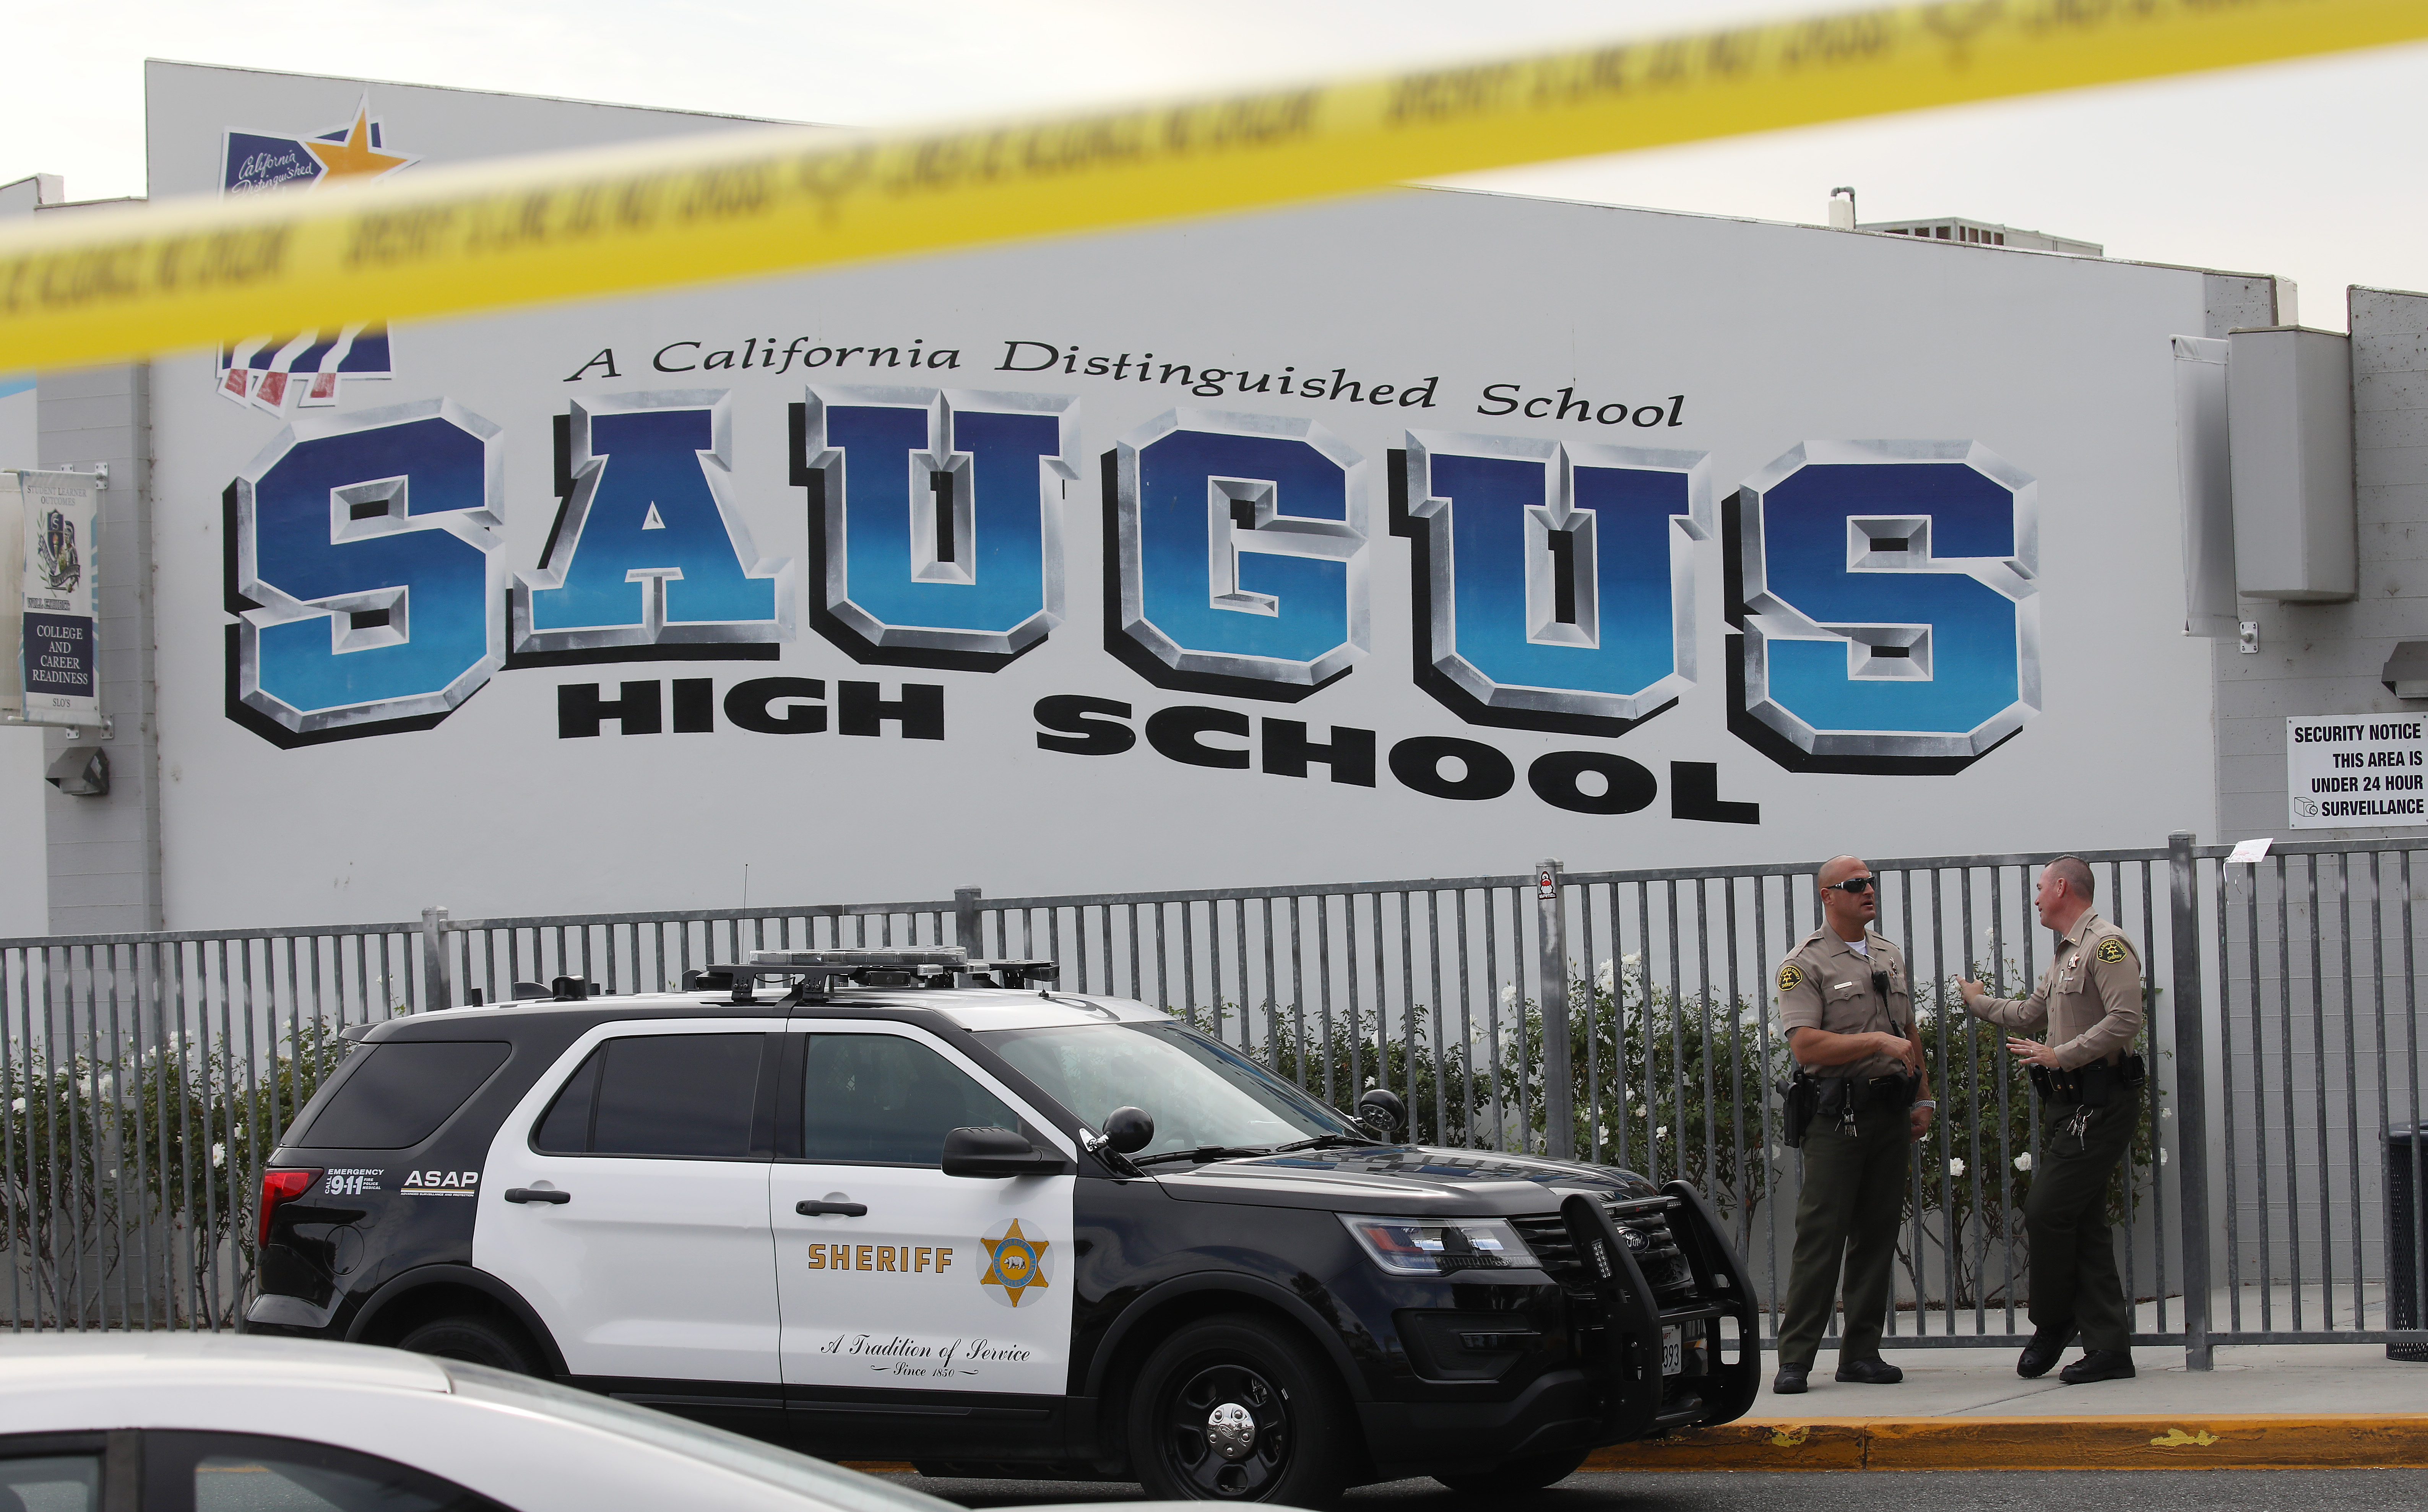 L.A. County Sheriff's Deputies are positioned at Saugus High School a day after a deadly shooting there on November 15, 2019 in Santa Clarita, California. (Mario Tama/Getty Images)